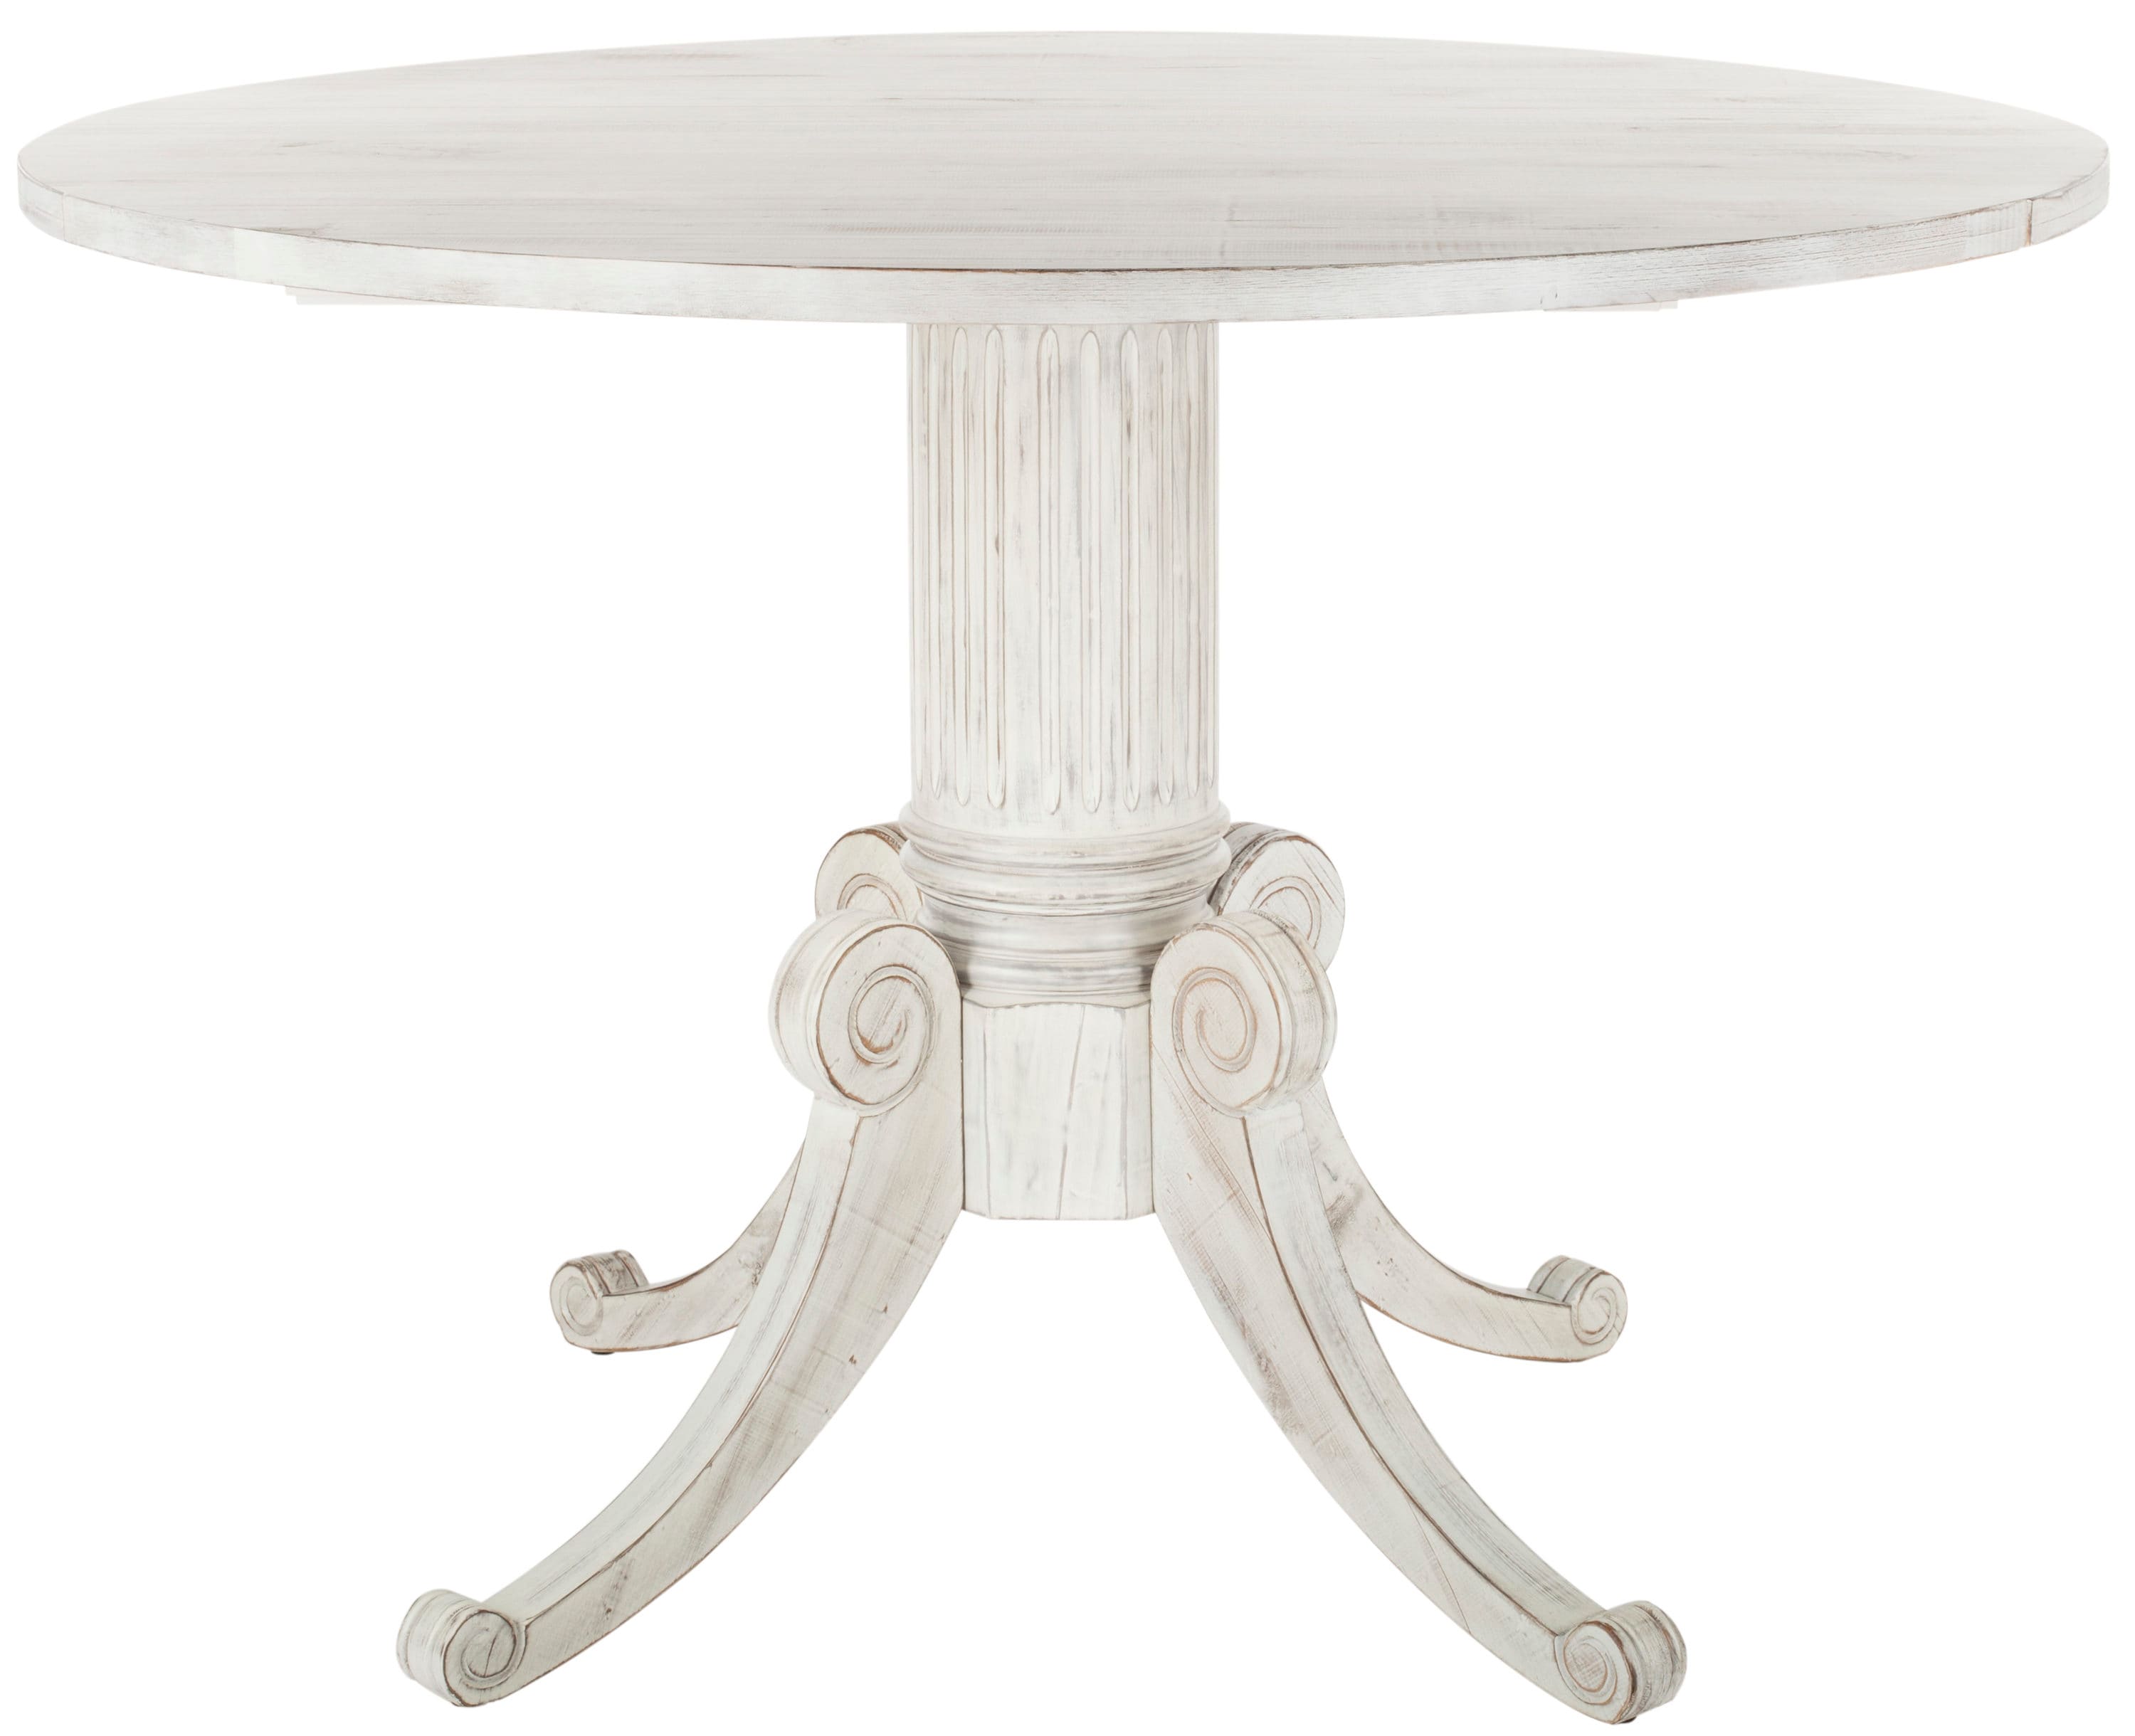 Safavieh Forest Antique White Round, Round Wood Dining Tables With Leaves